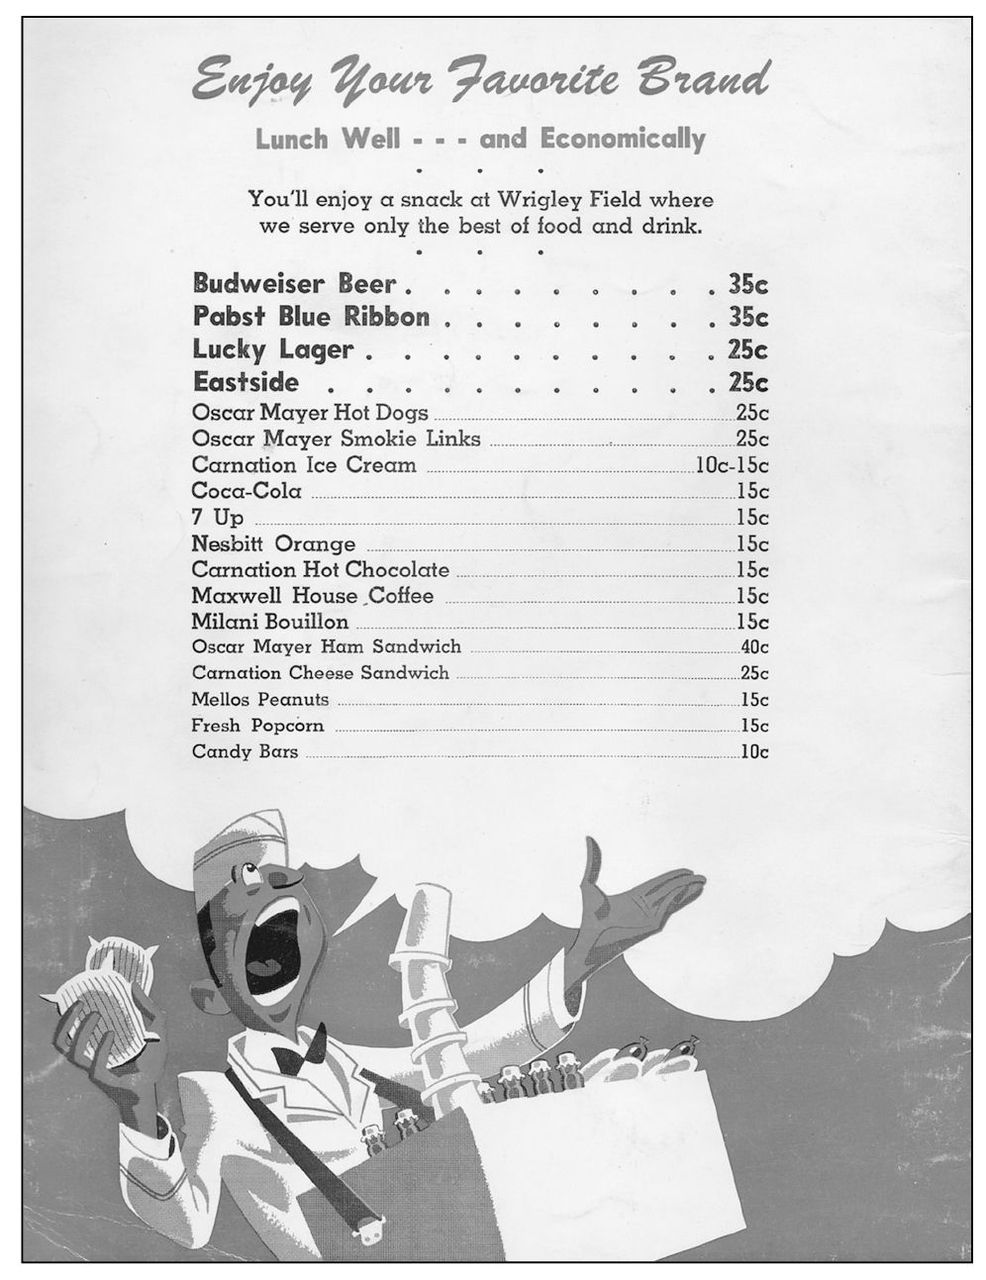 The back of the 1956 yearbook featured the stadiums food and drink menu - photo 12